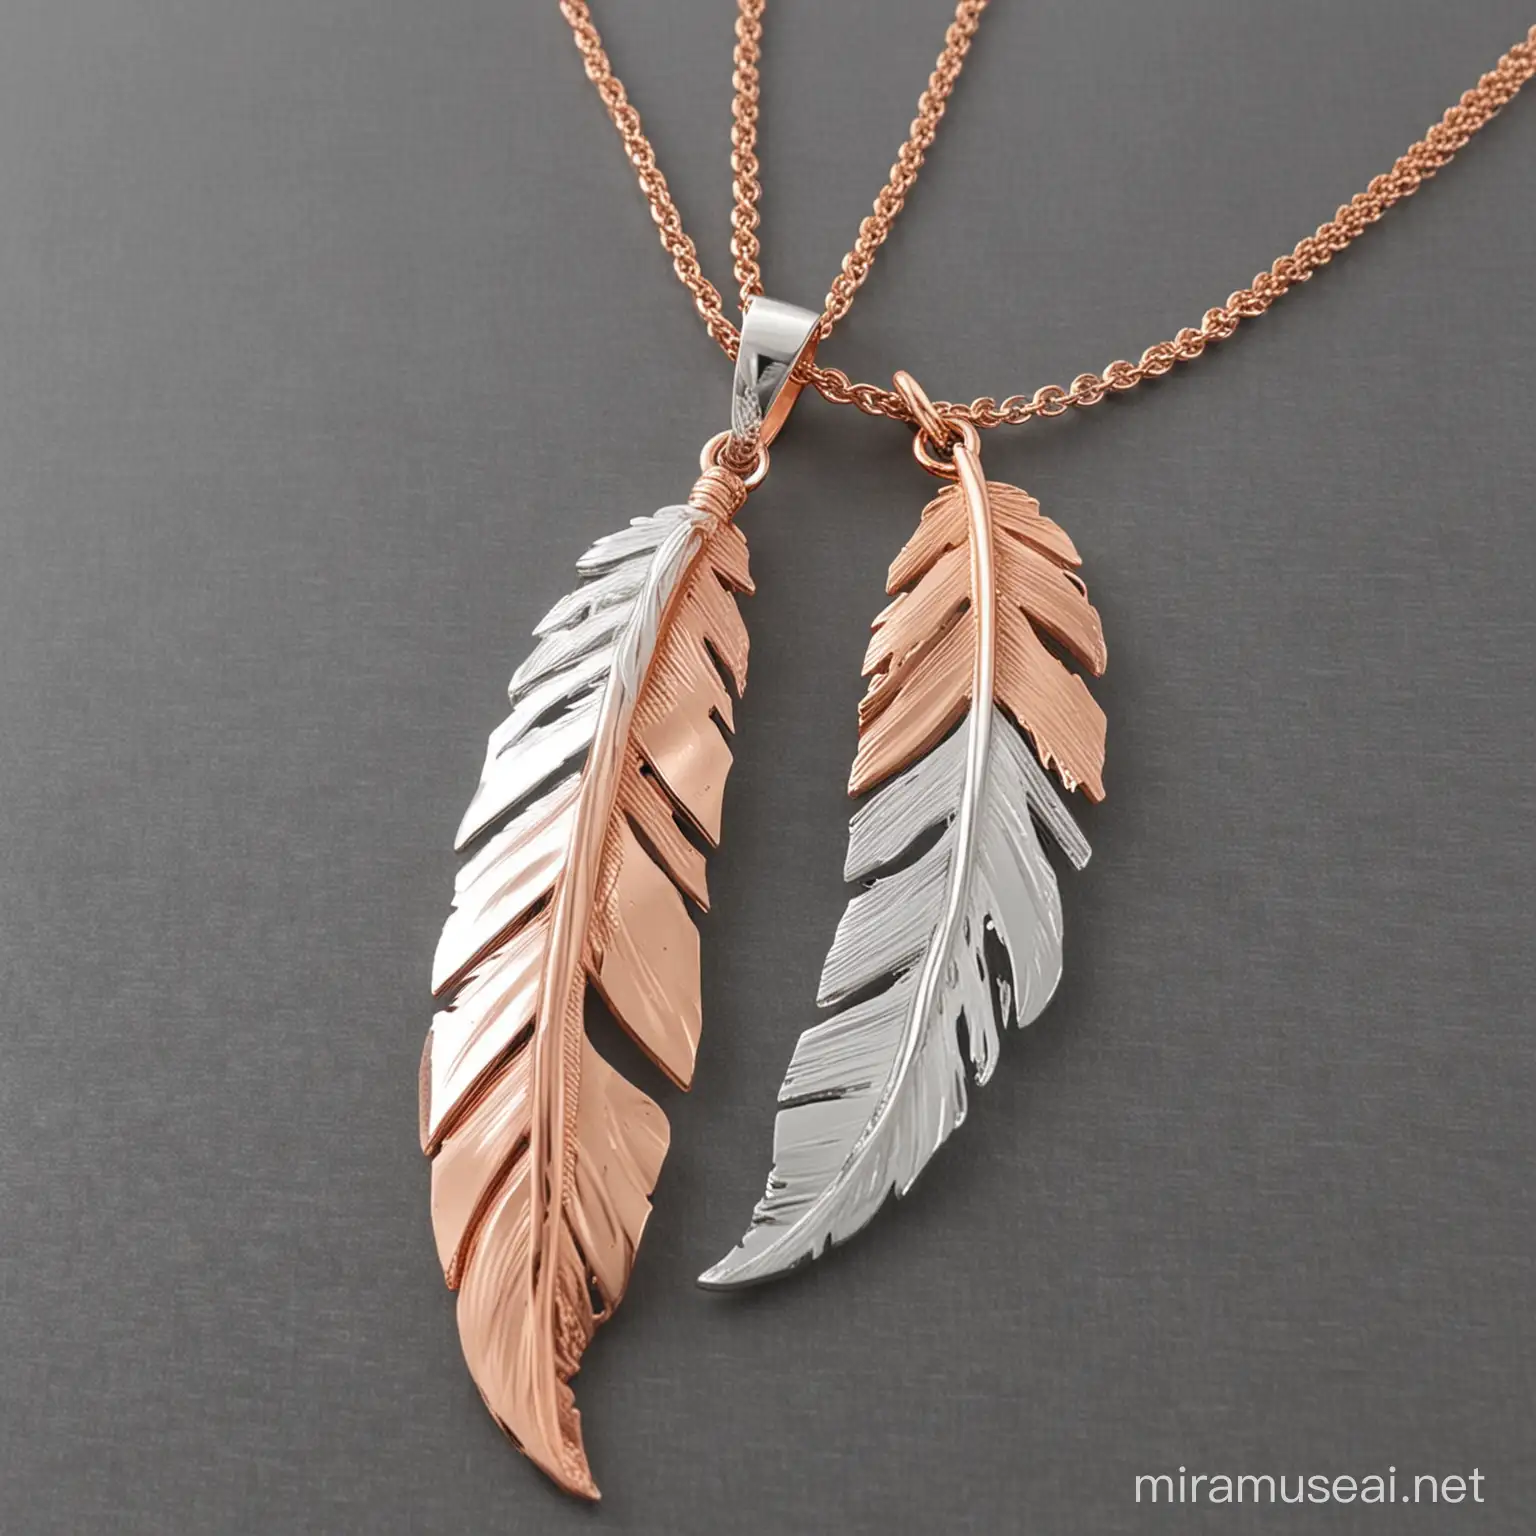 Design an feather hollow pendant with white and rose gold